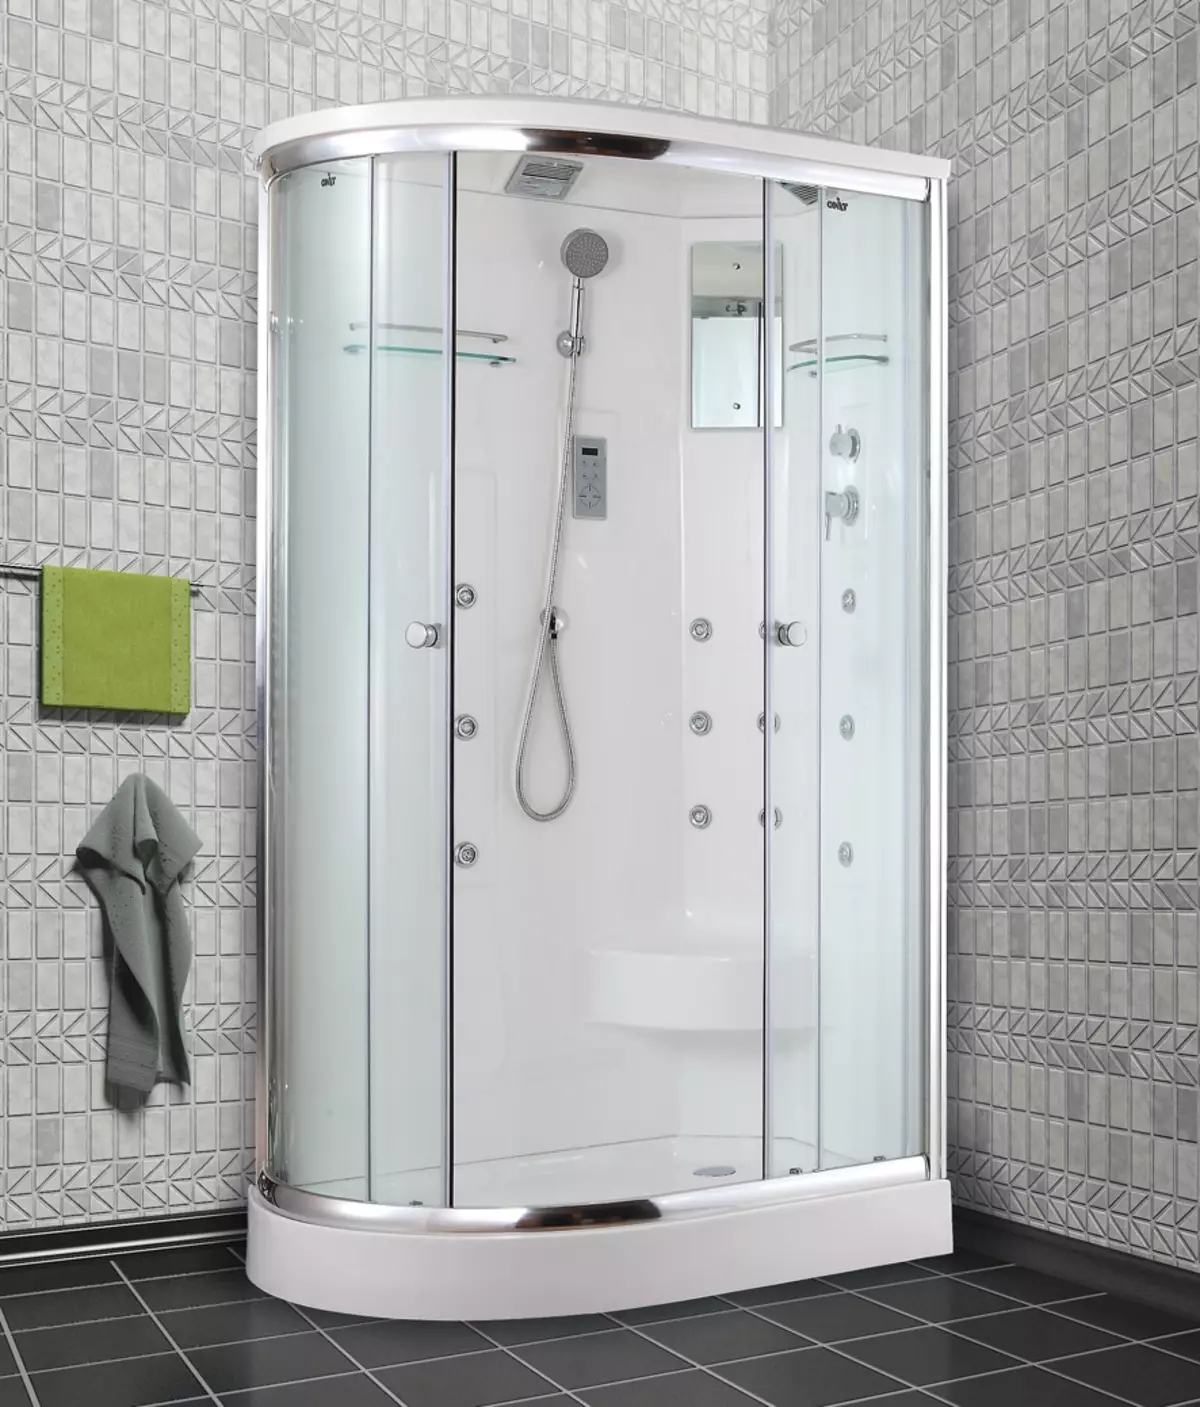 Finnish shower cabins: 80x80, 90x90 cm and other dimensions of models, Deto brands and others from Finland 10327_5